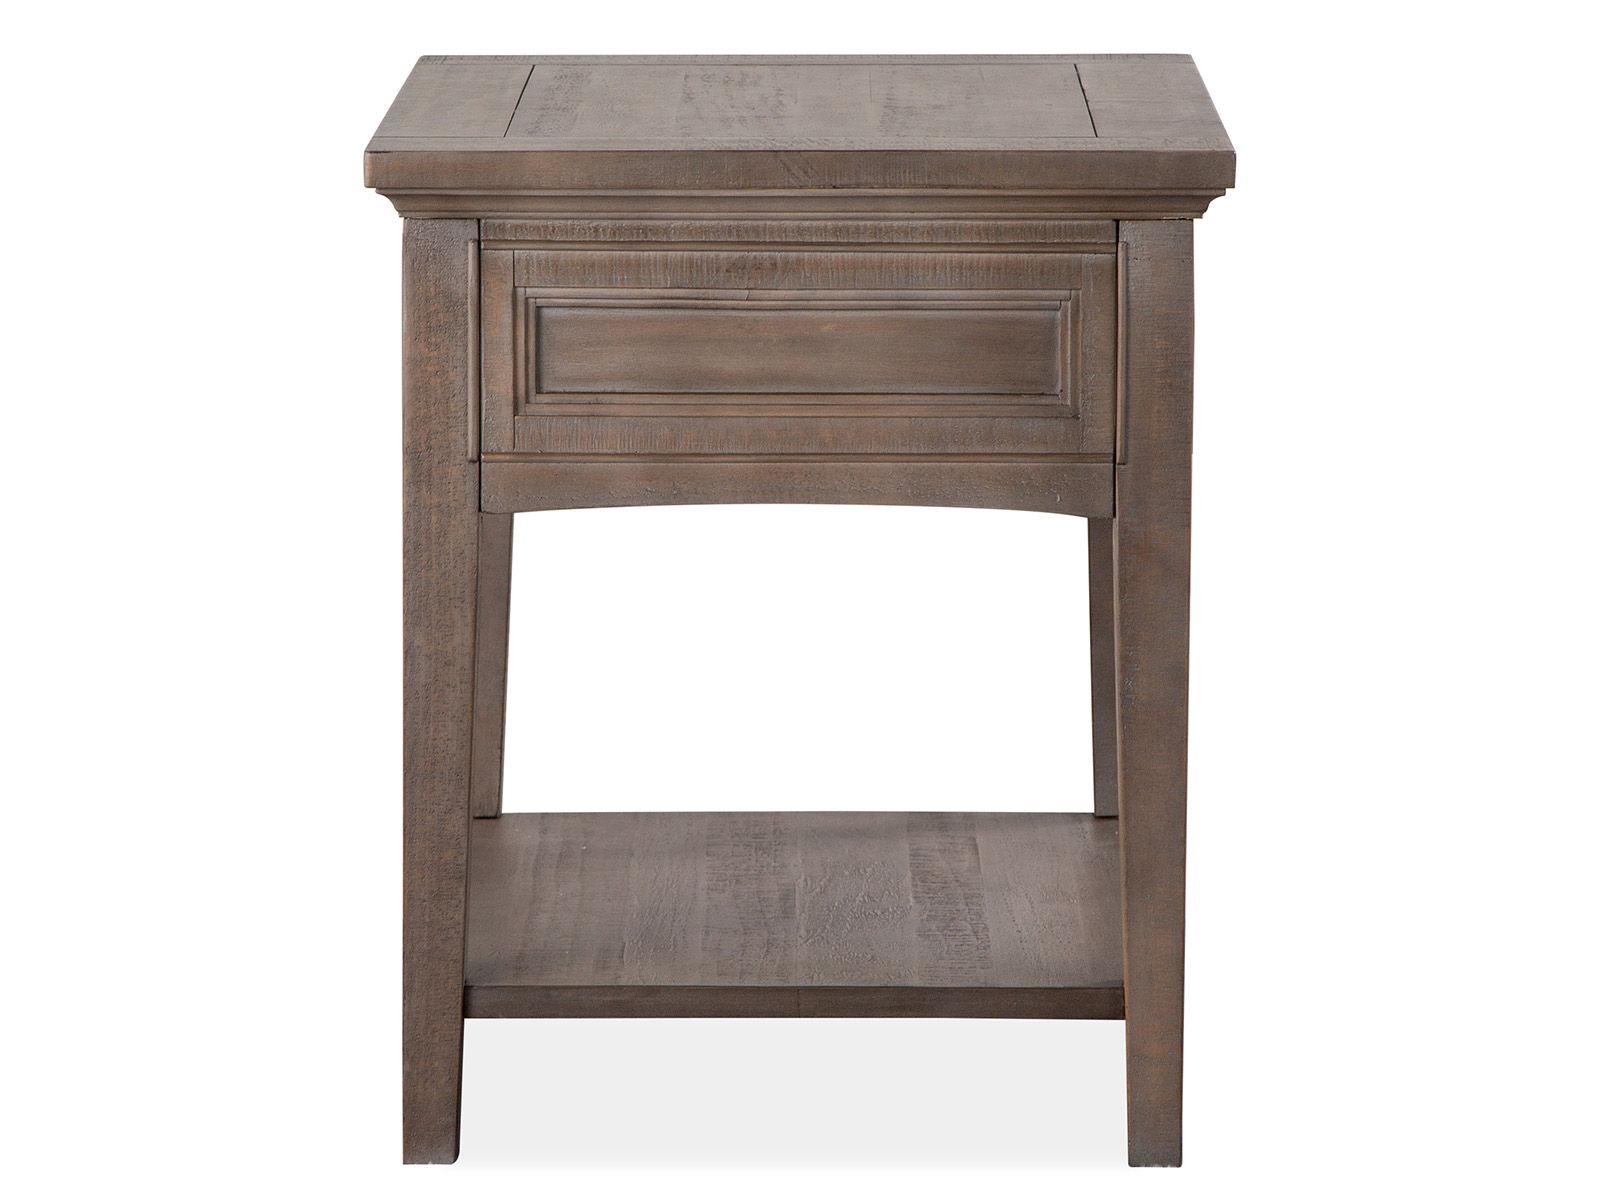 Magnussen Furniture - Paxton Place - Rectangular End Table - Dovetail Grey - 5th Avenue Furniture